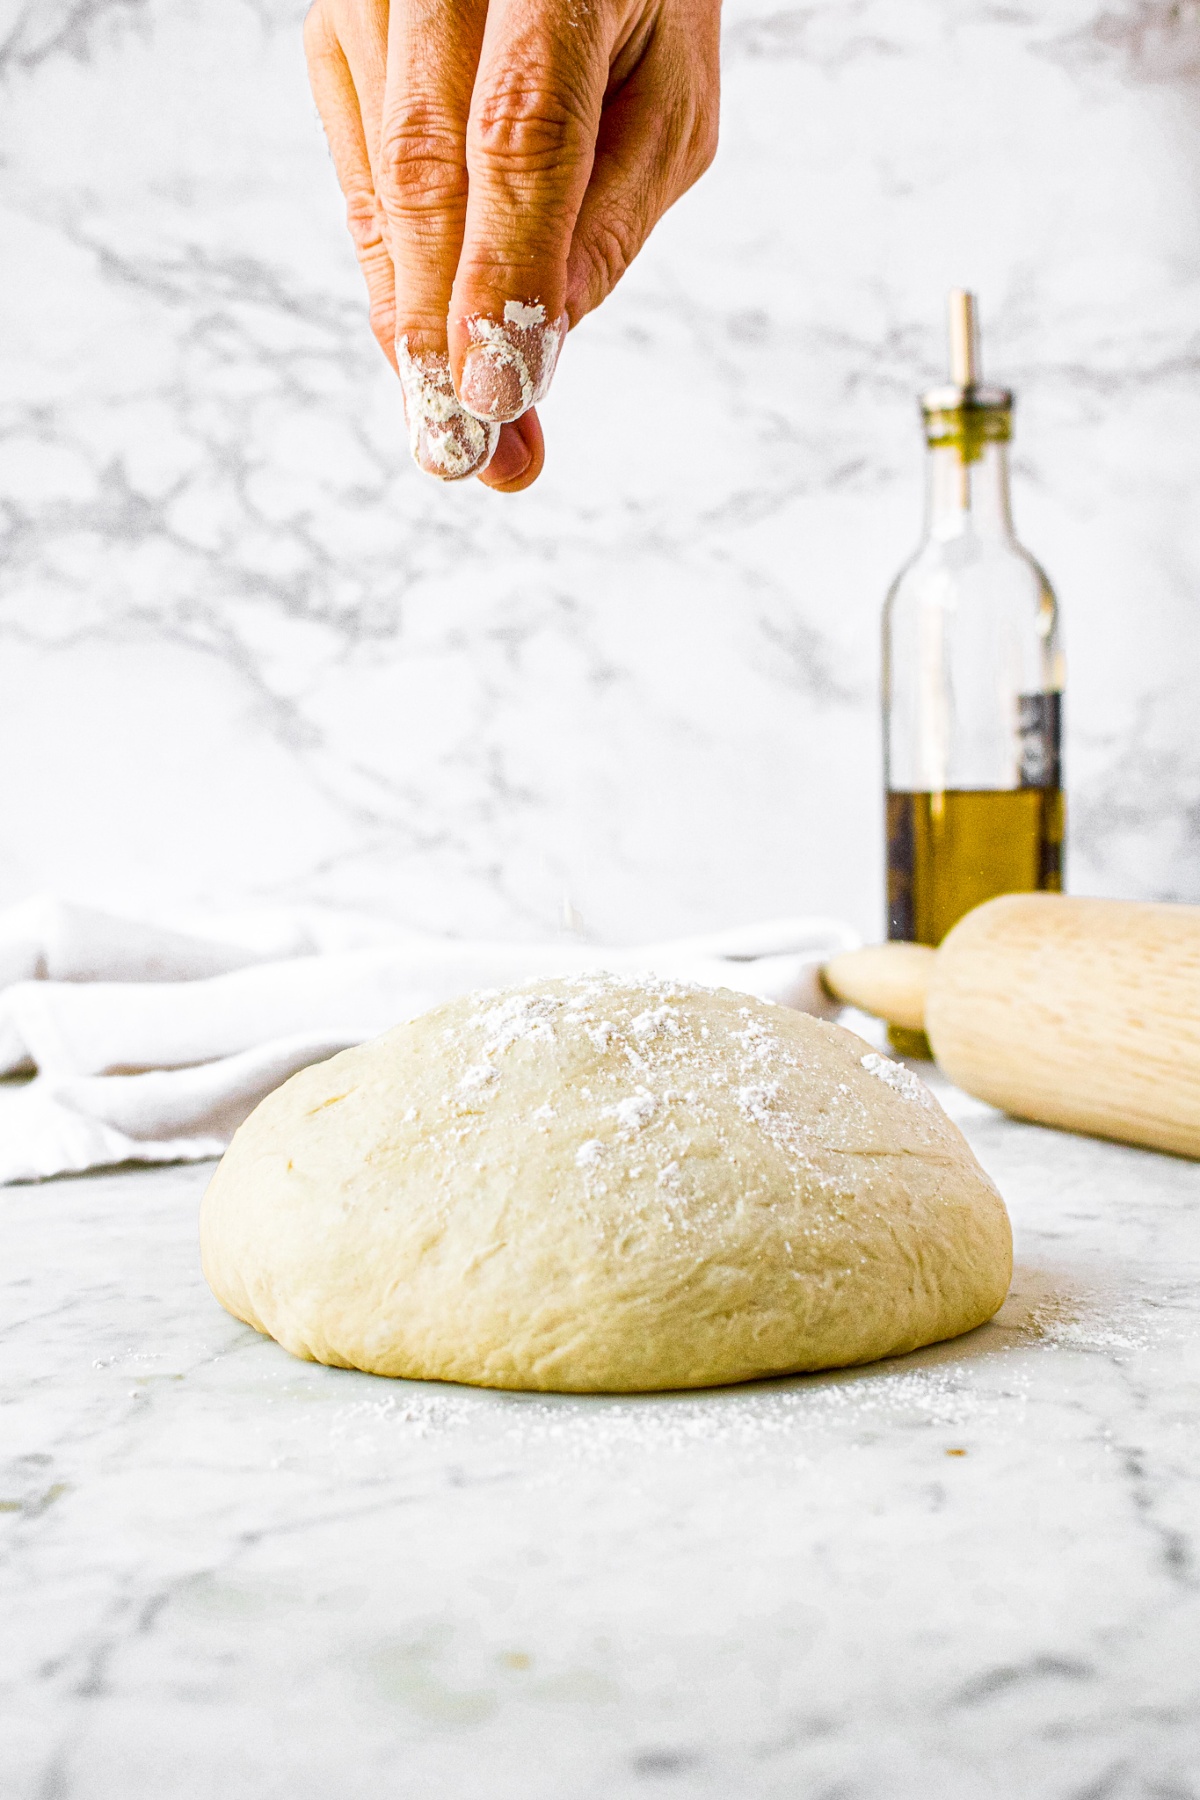 Head-on shot of a ball of pizza dough sitting on a counter with a hand sprinkling all purpose flour on top. There is a bottlw of olive oil and rolling pin in the background.